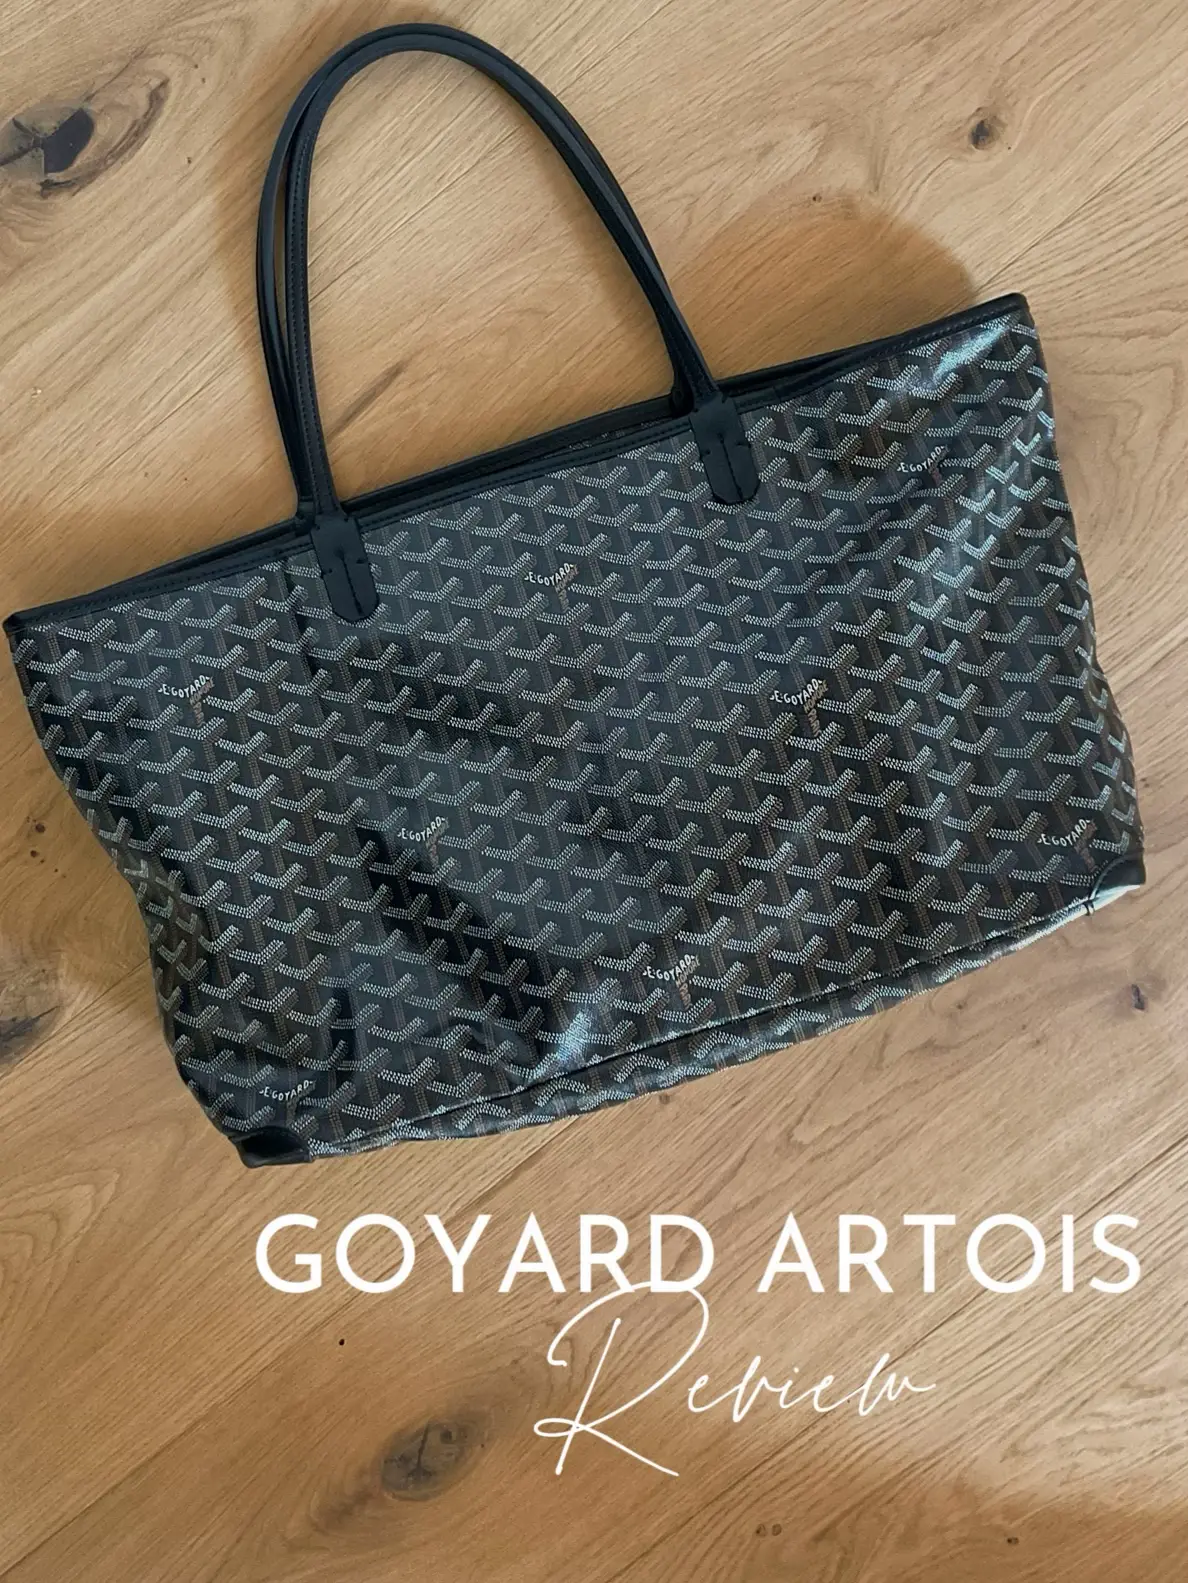 Goyard Artois MM Review and Comparison with LV Neverfull MM 